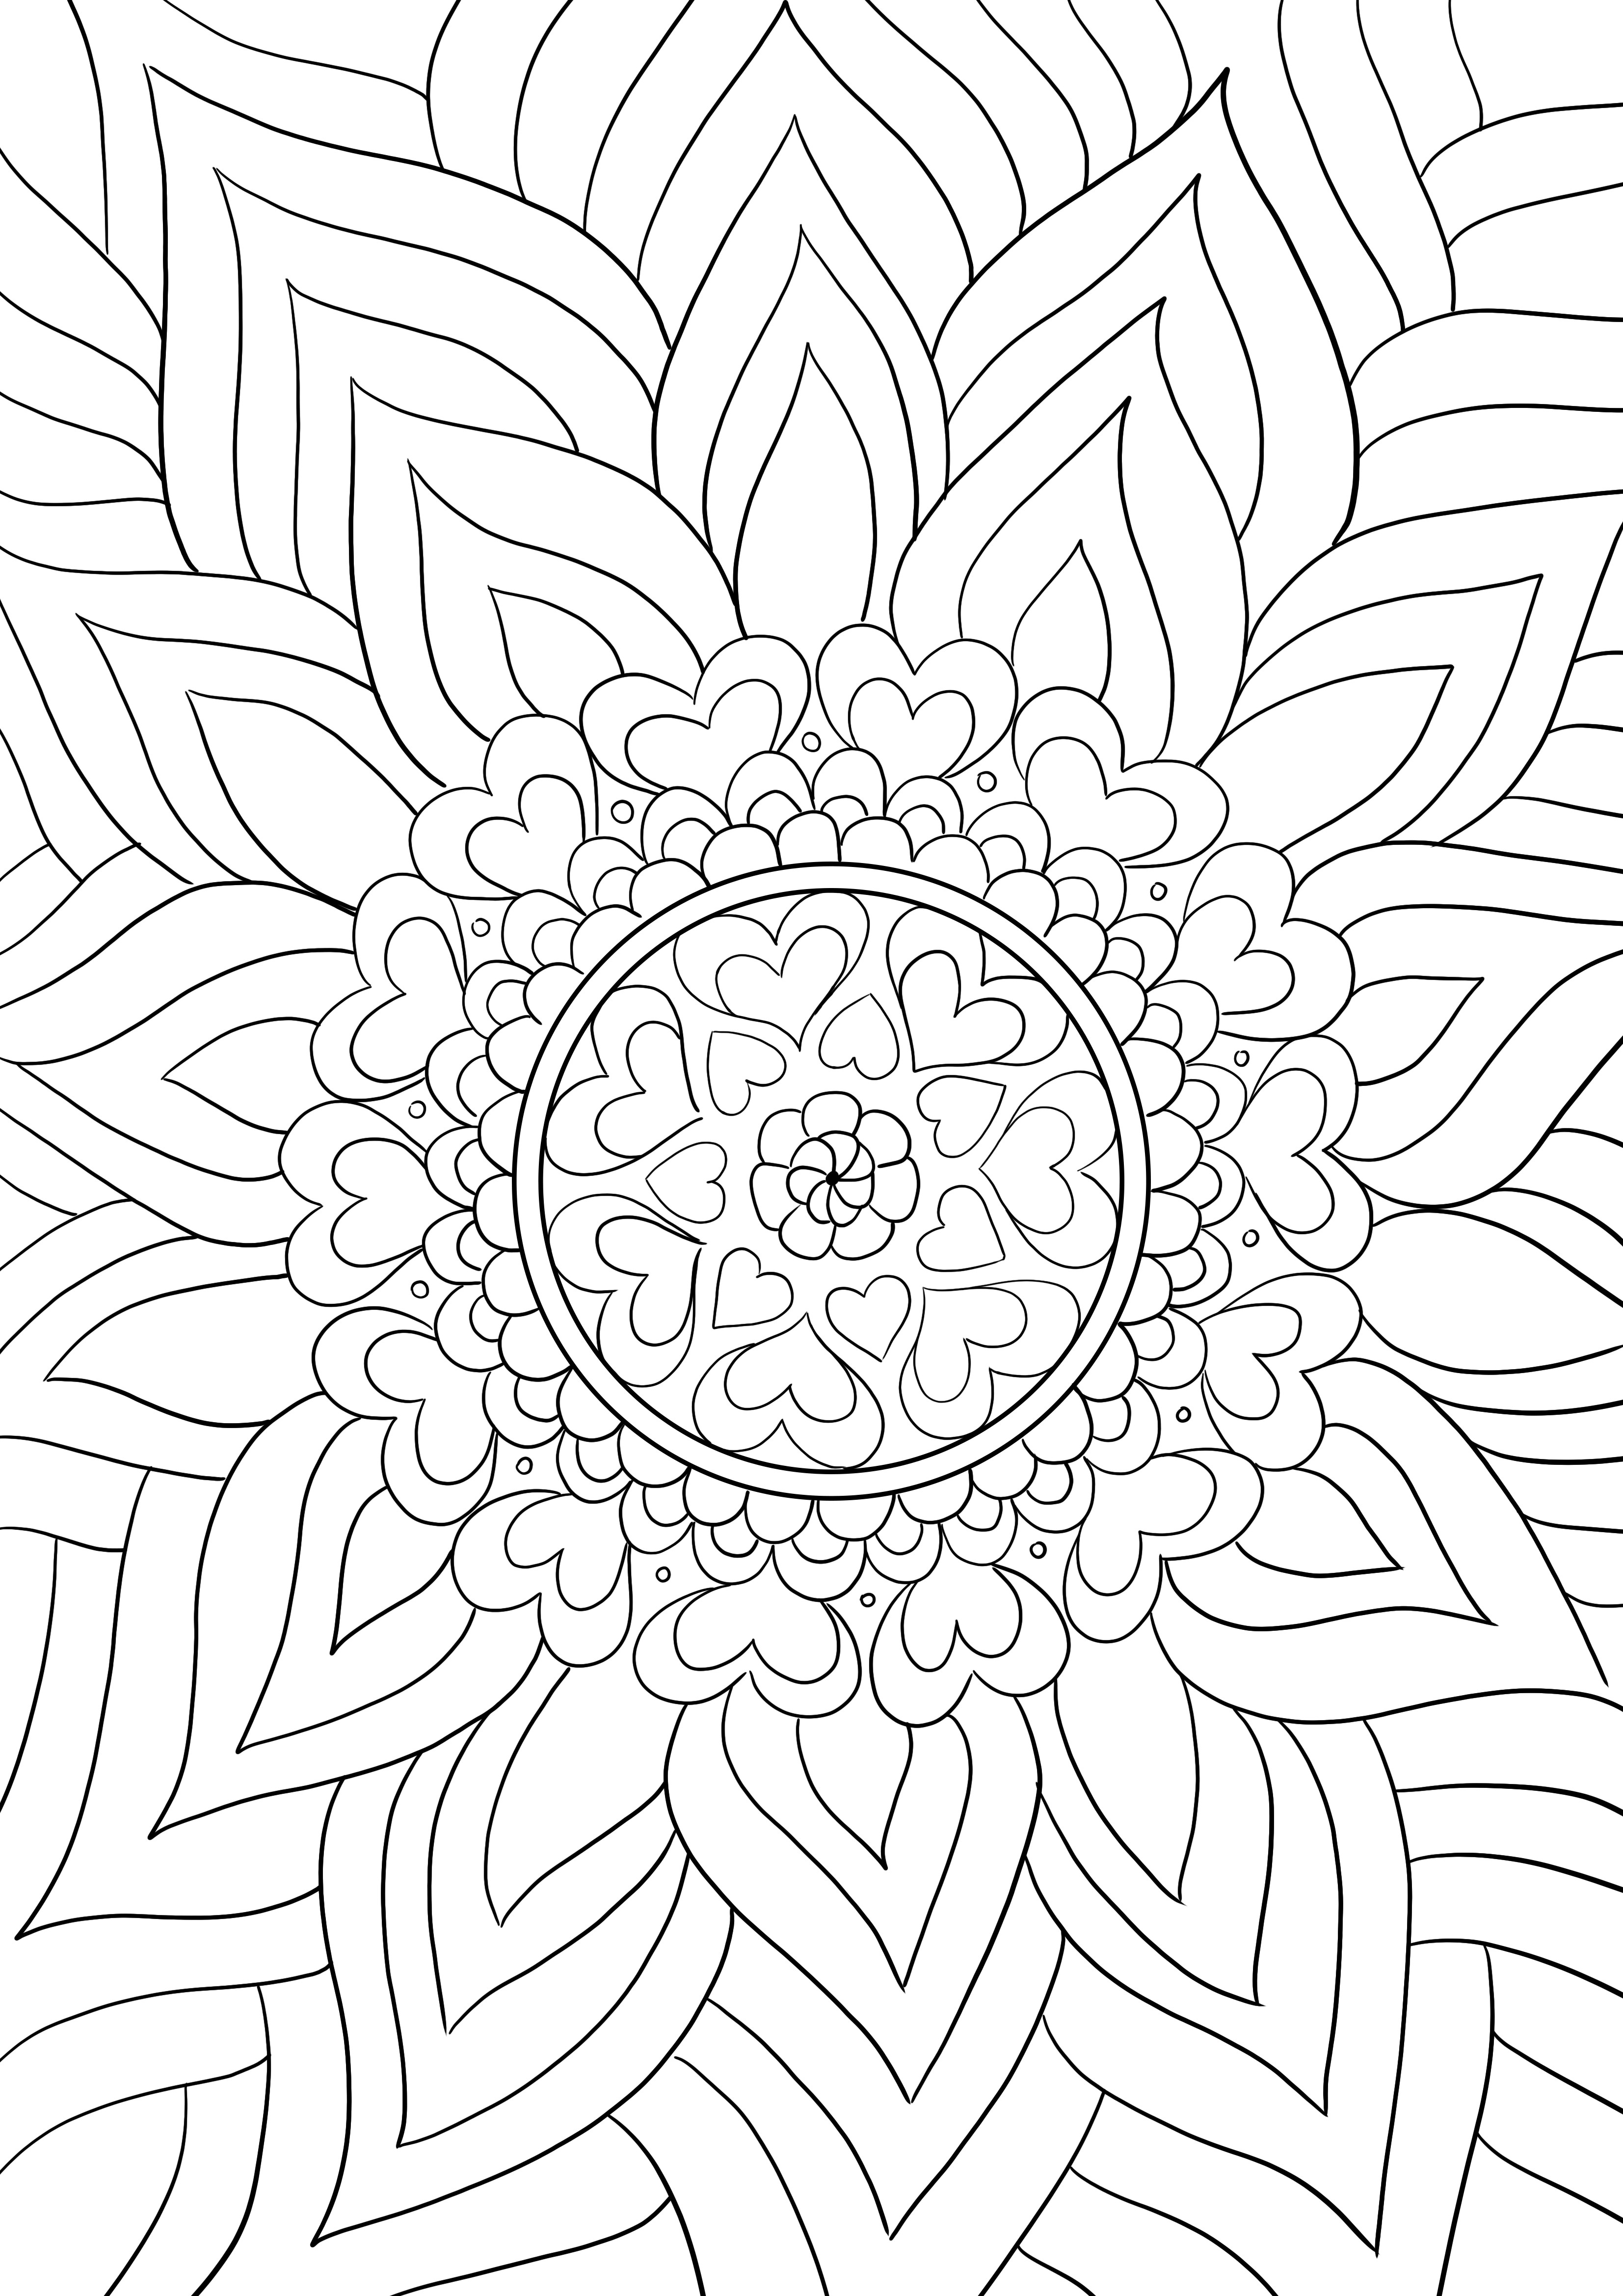 floral-mandala-valentine-s-day-card-coloring-page-for-free-printing